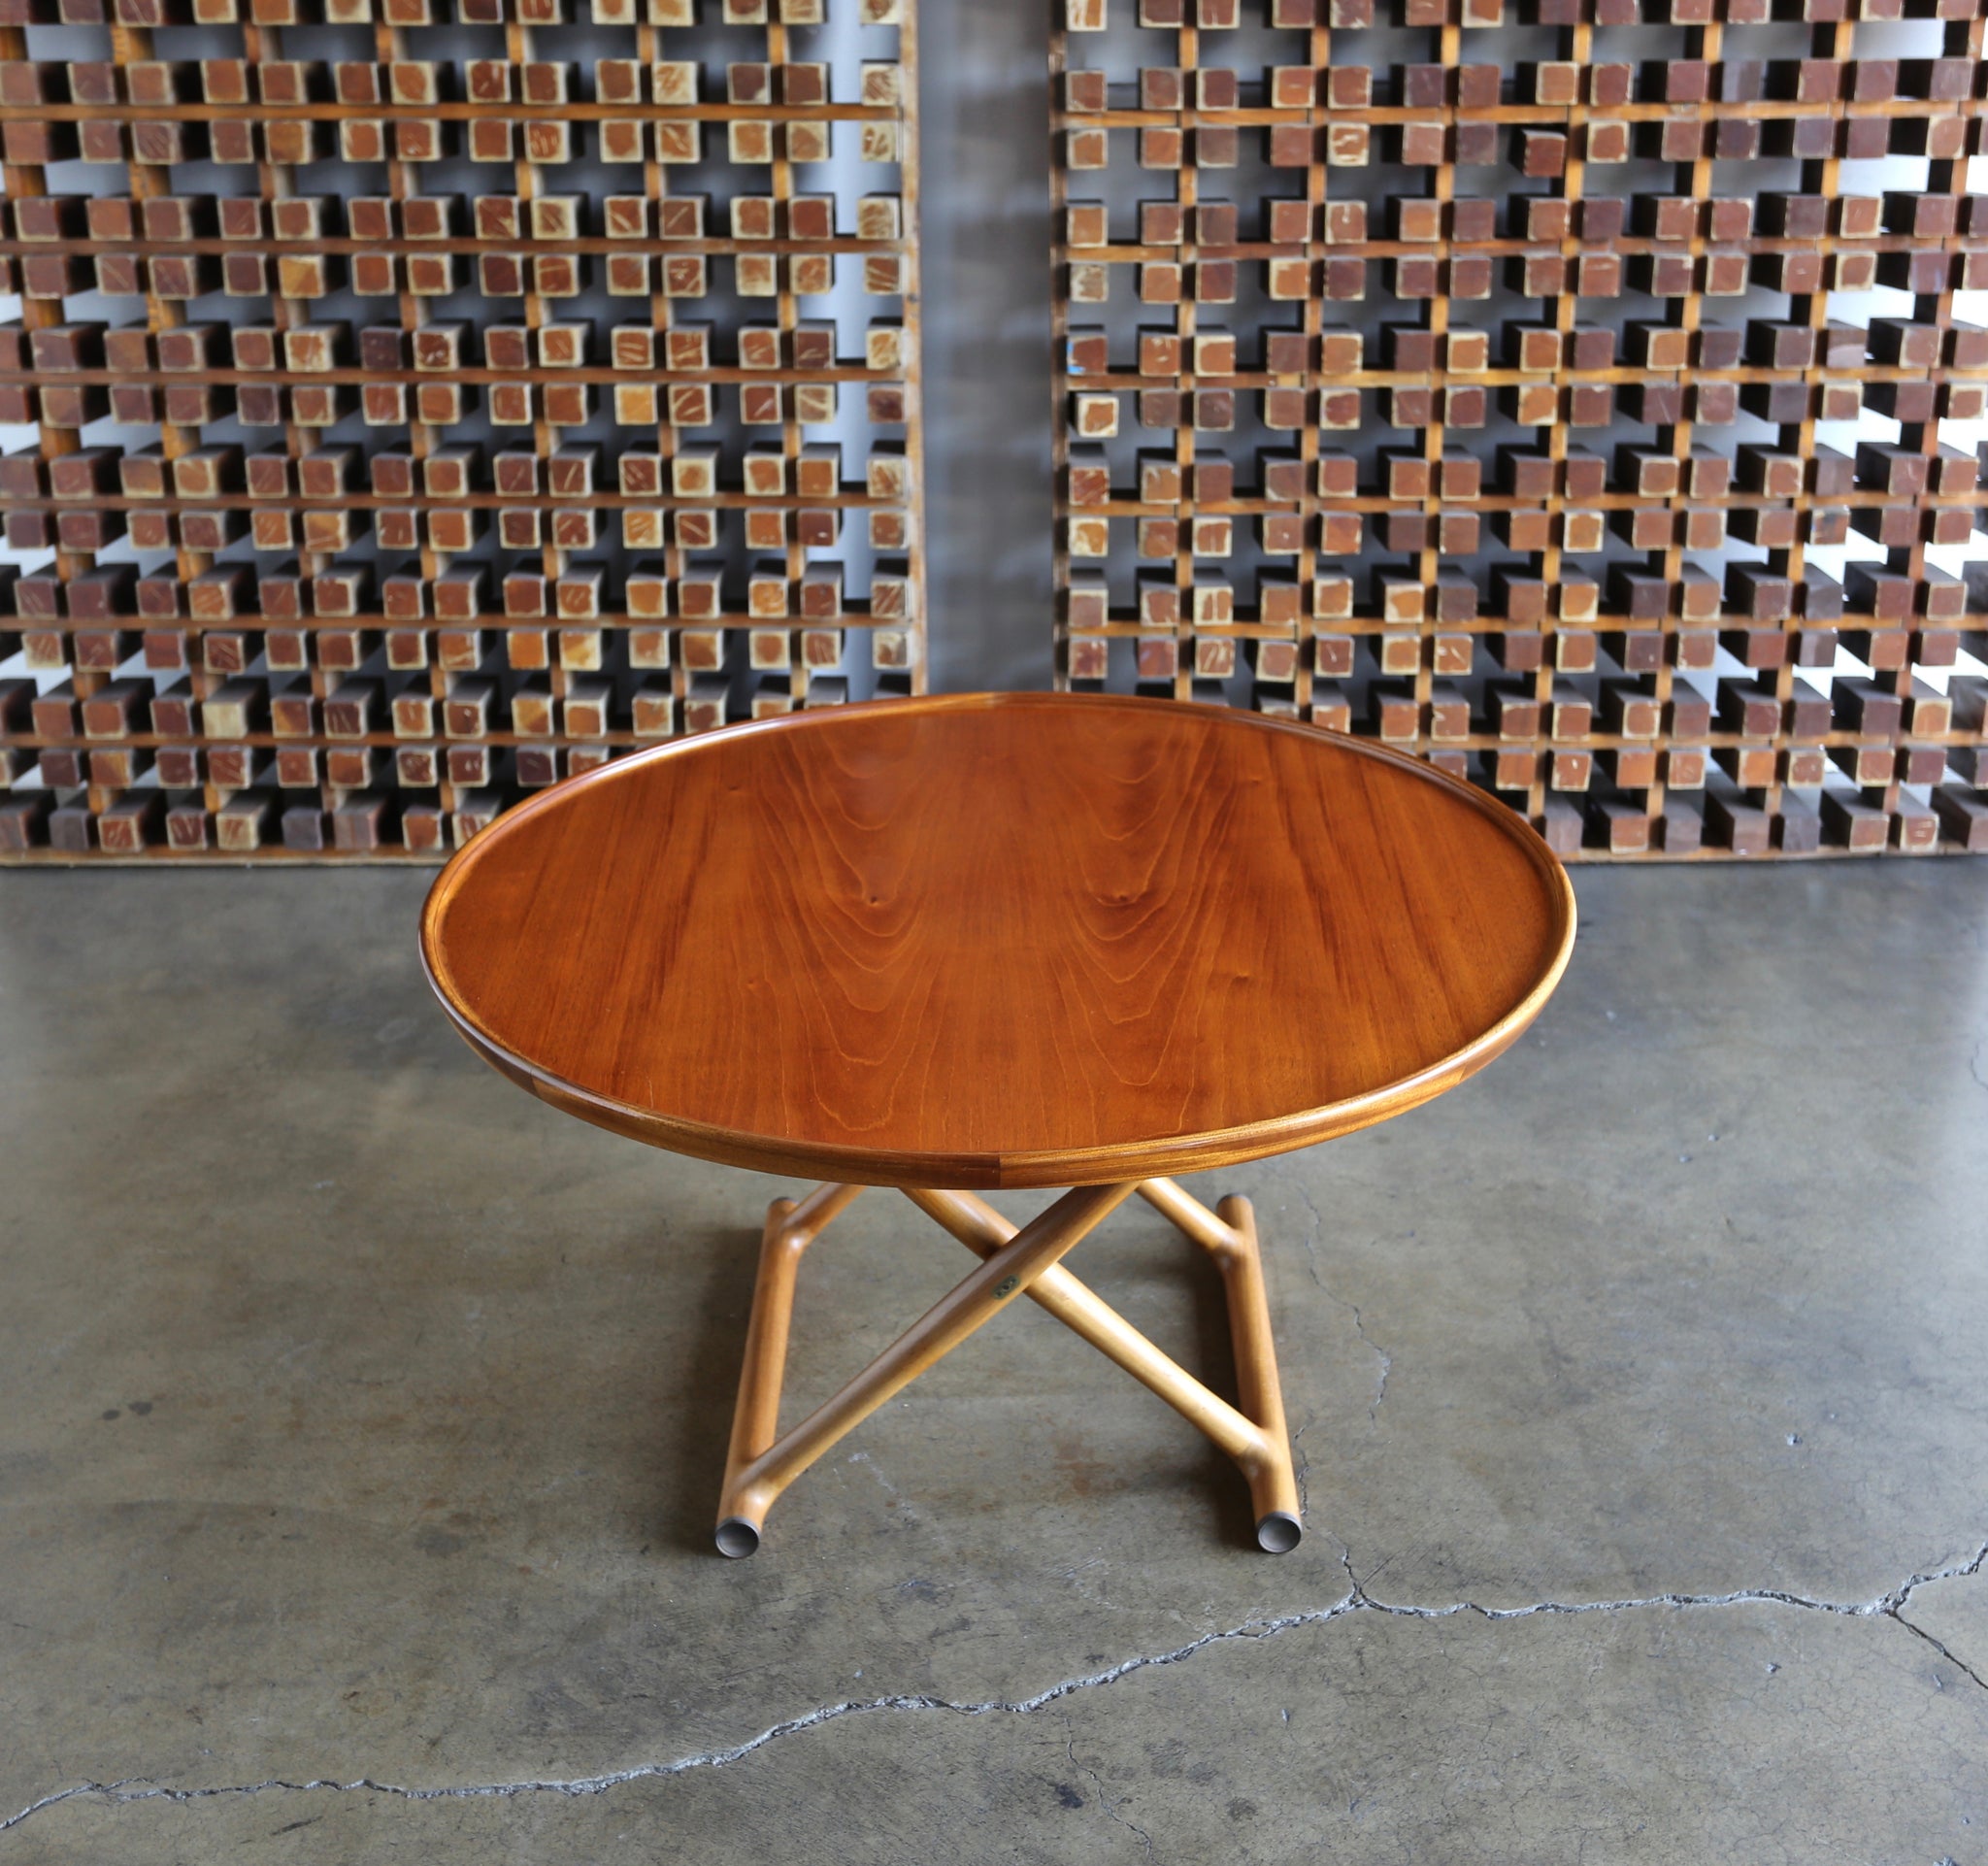 = SOLD = Large Egyptian Table by Mogens Lassen for A.J. Iversen circa 1955